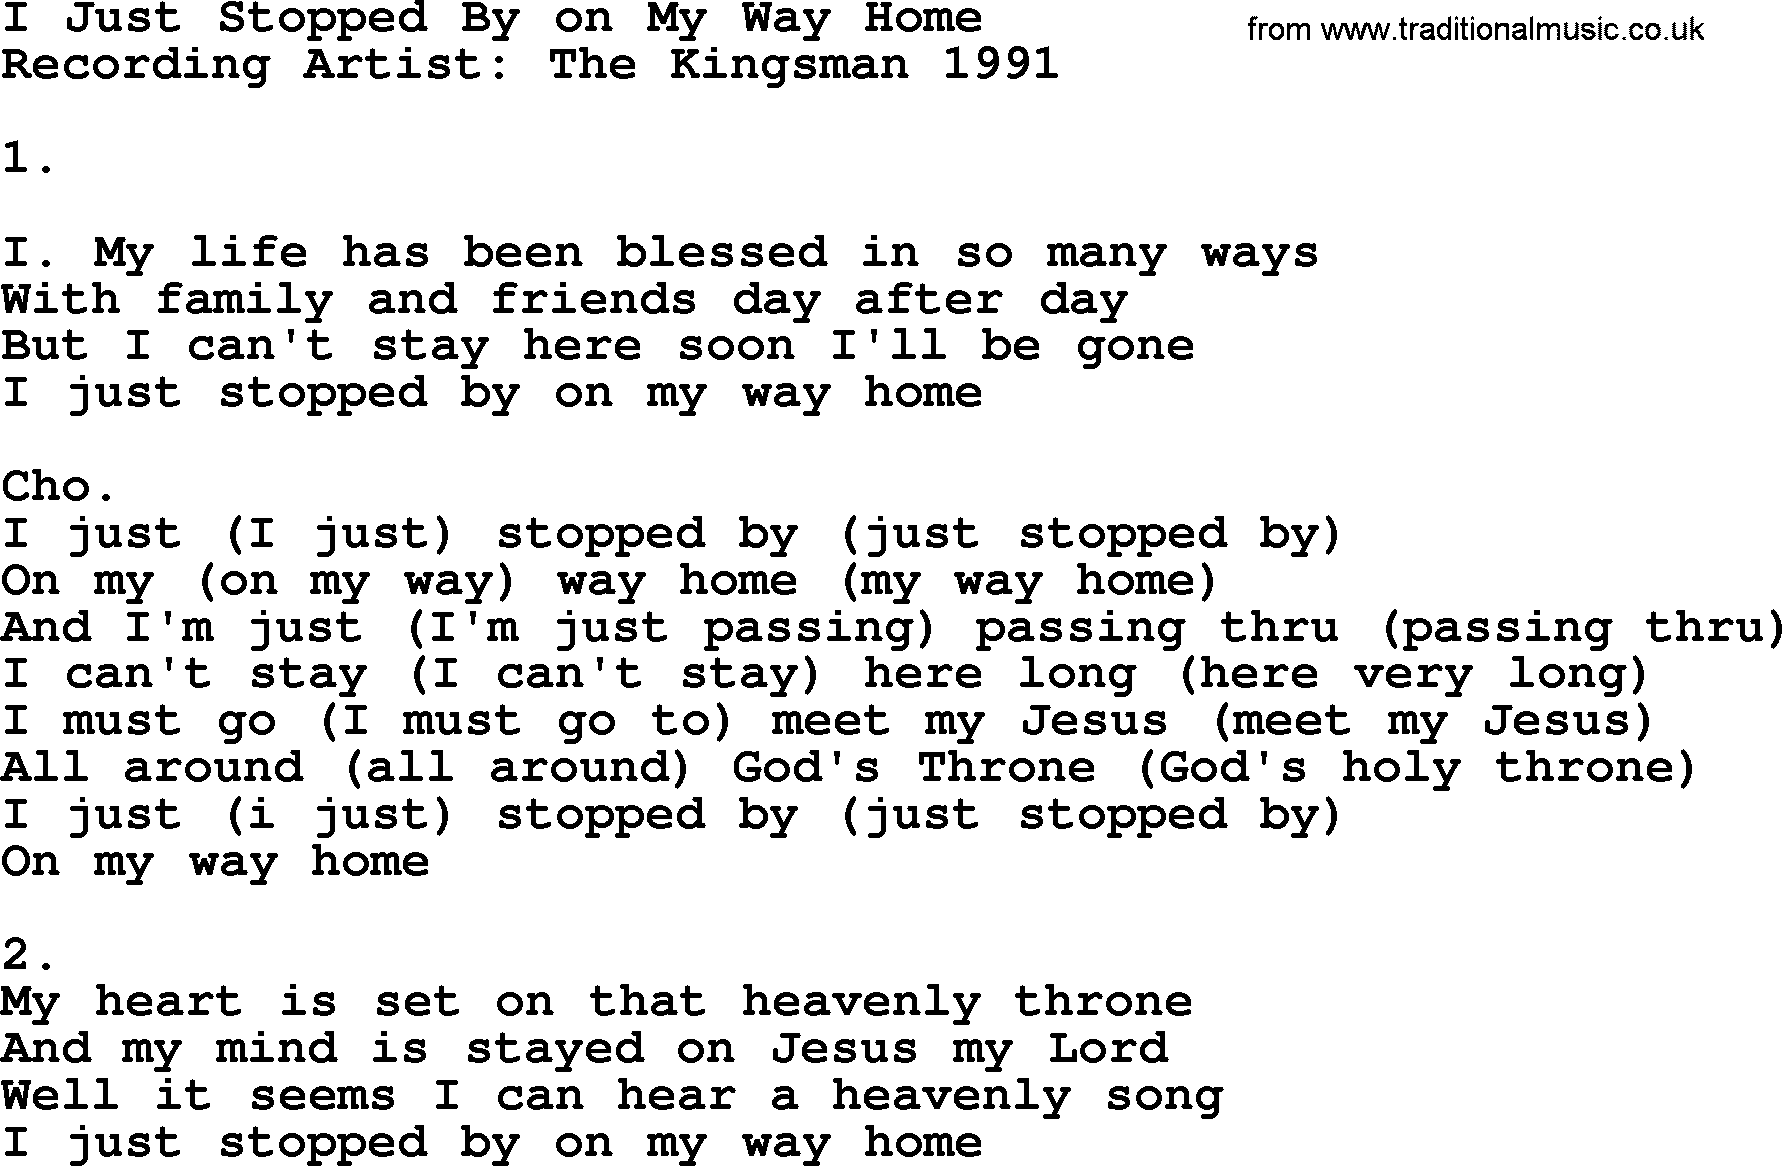 Apostolic & Pentecostal Hymns and Songs, Hymn: I Just Stopped By on My Way Home lyrics and PDF